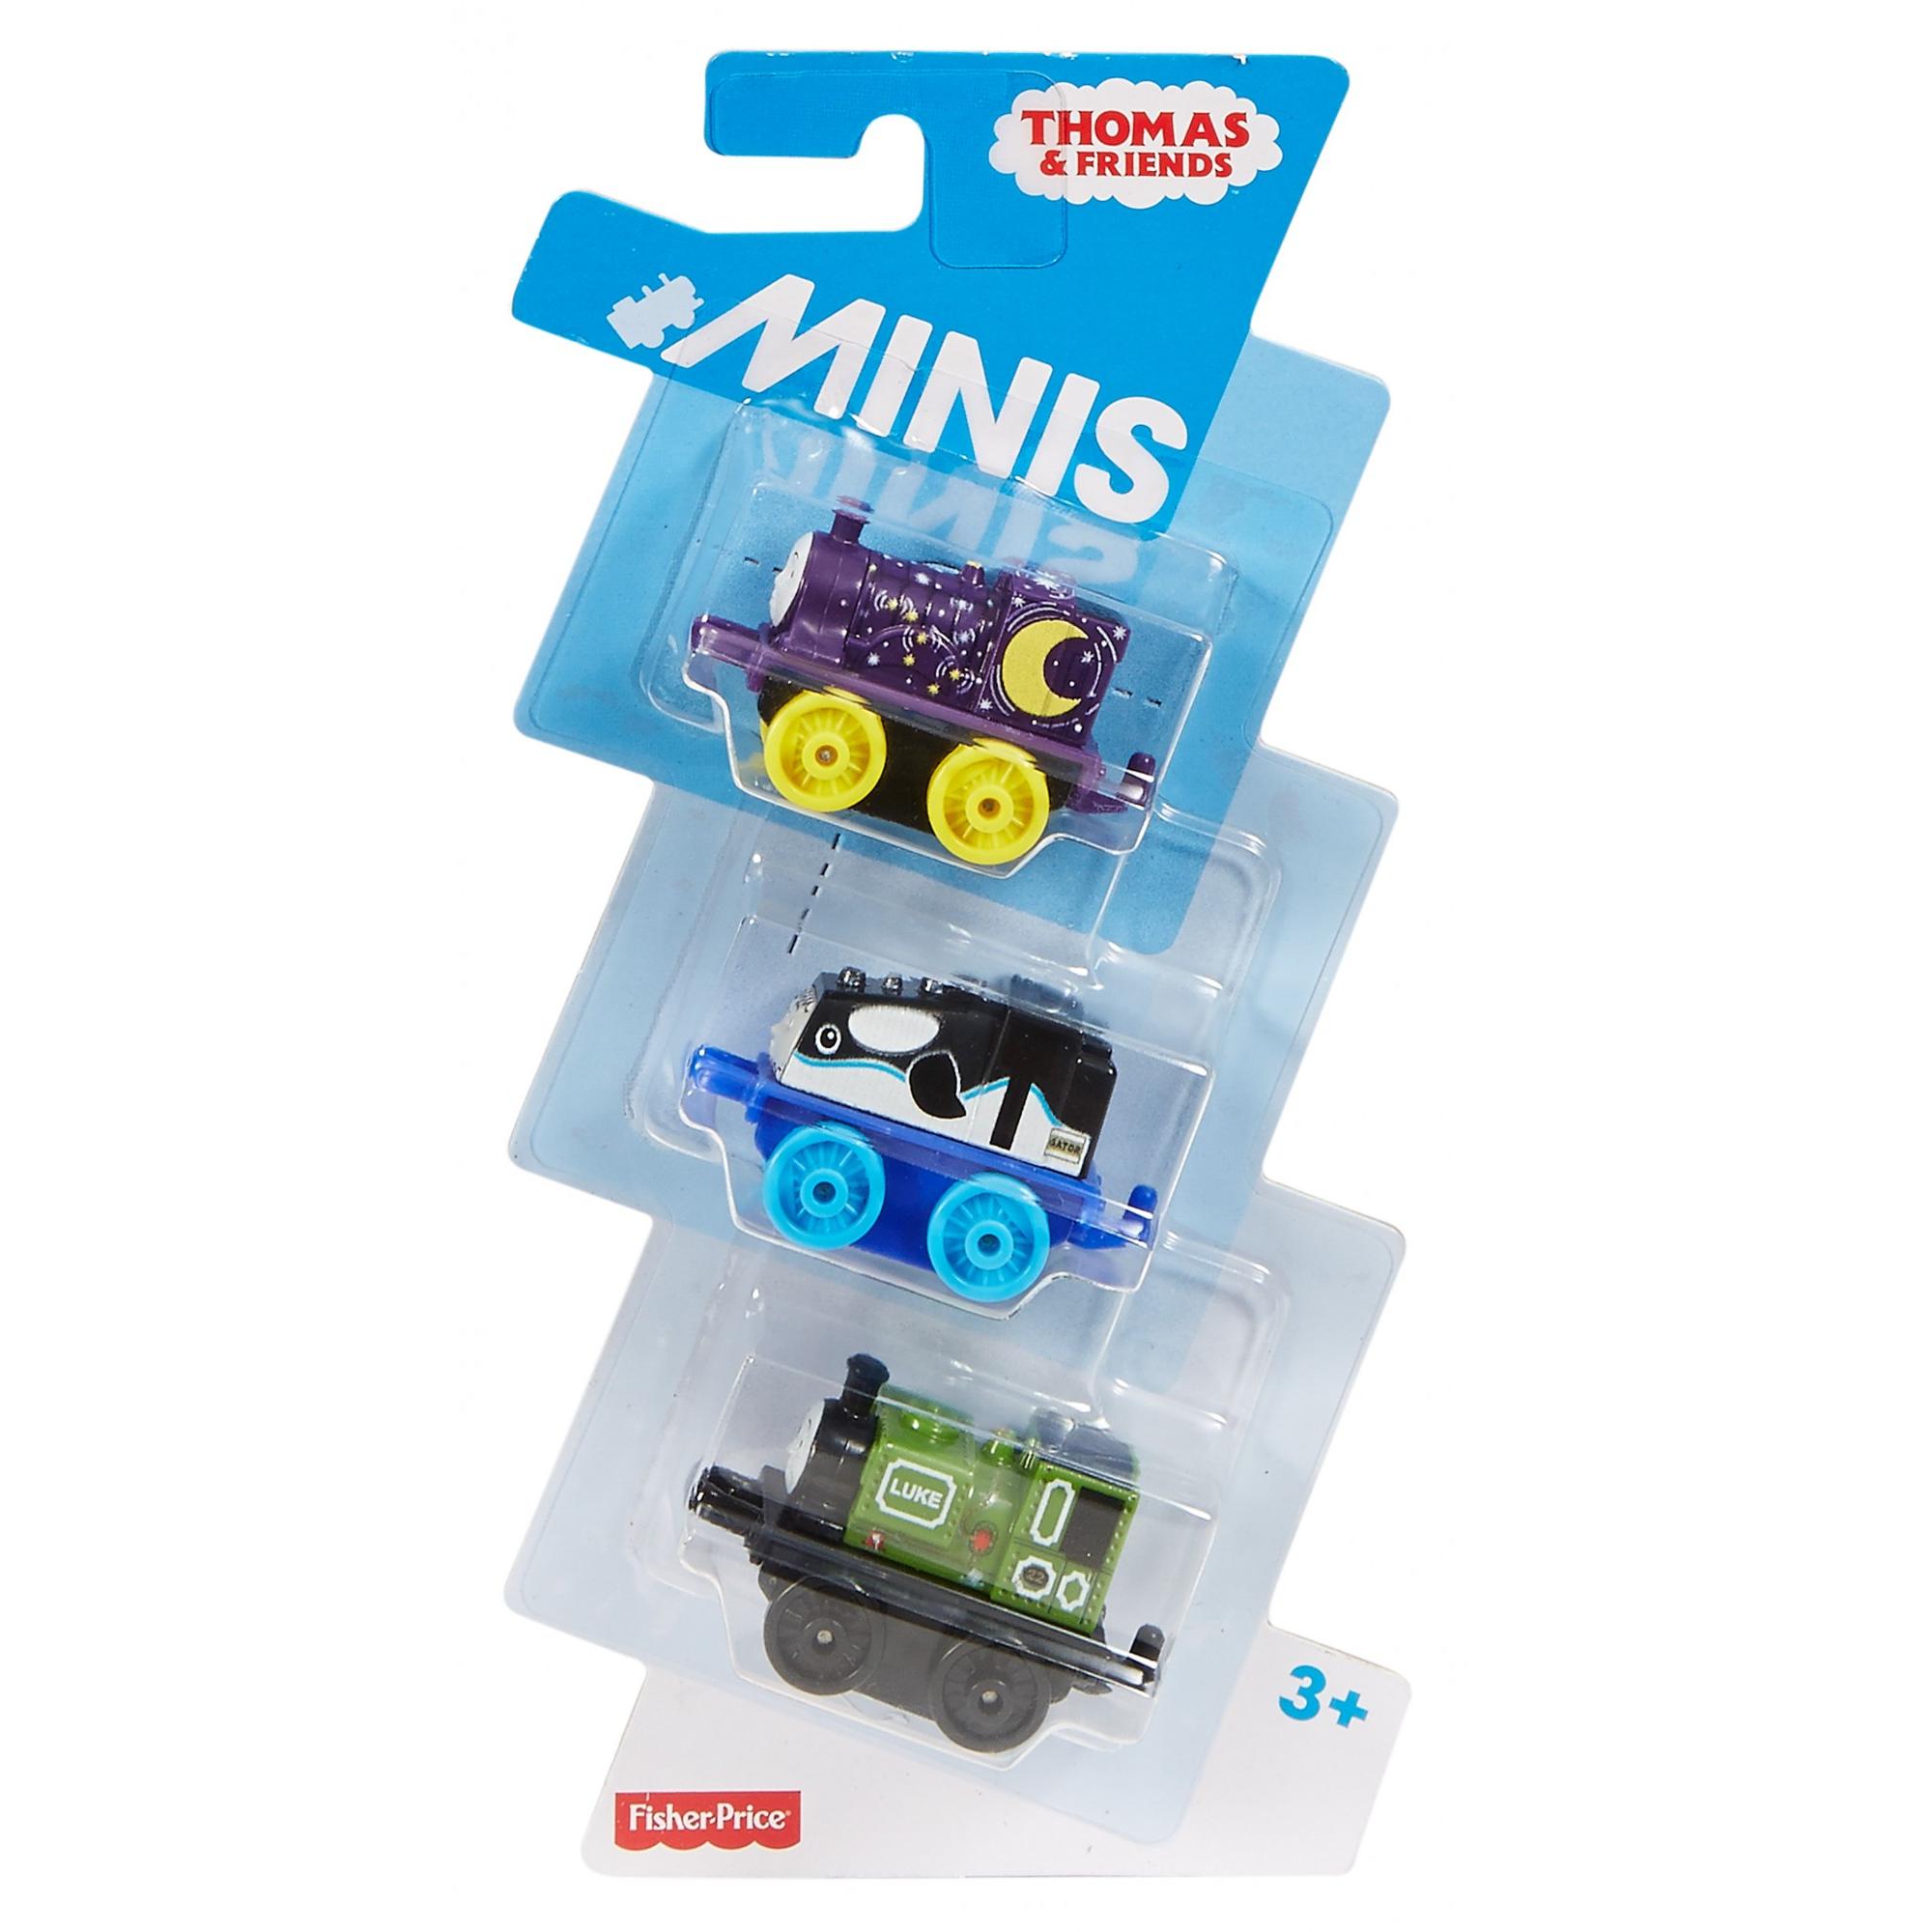 Thomas & Friends MINIS Collectible Characters 3-Pack - image 4 of 5